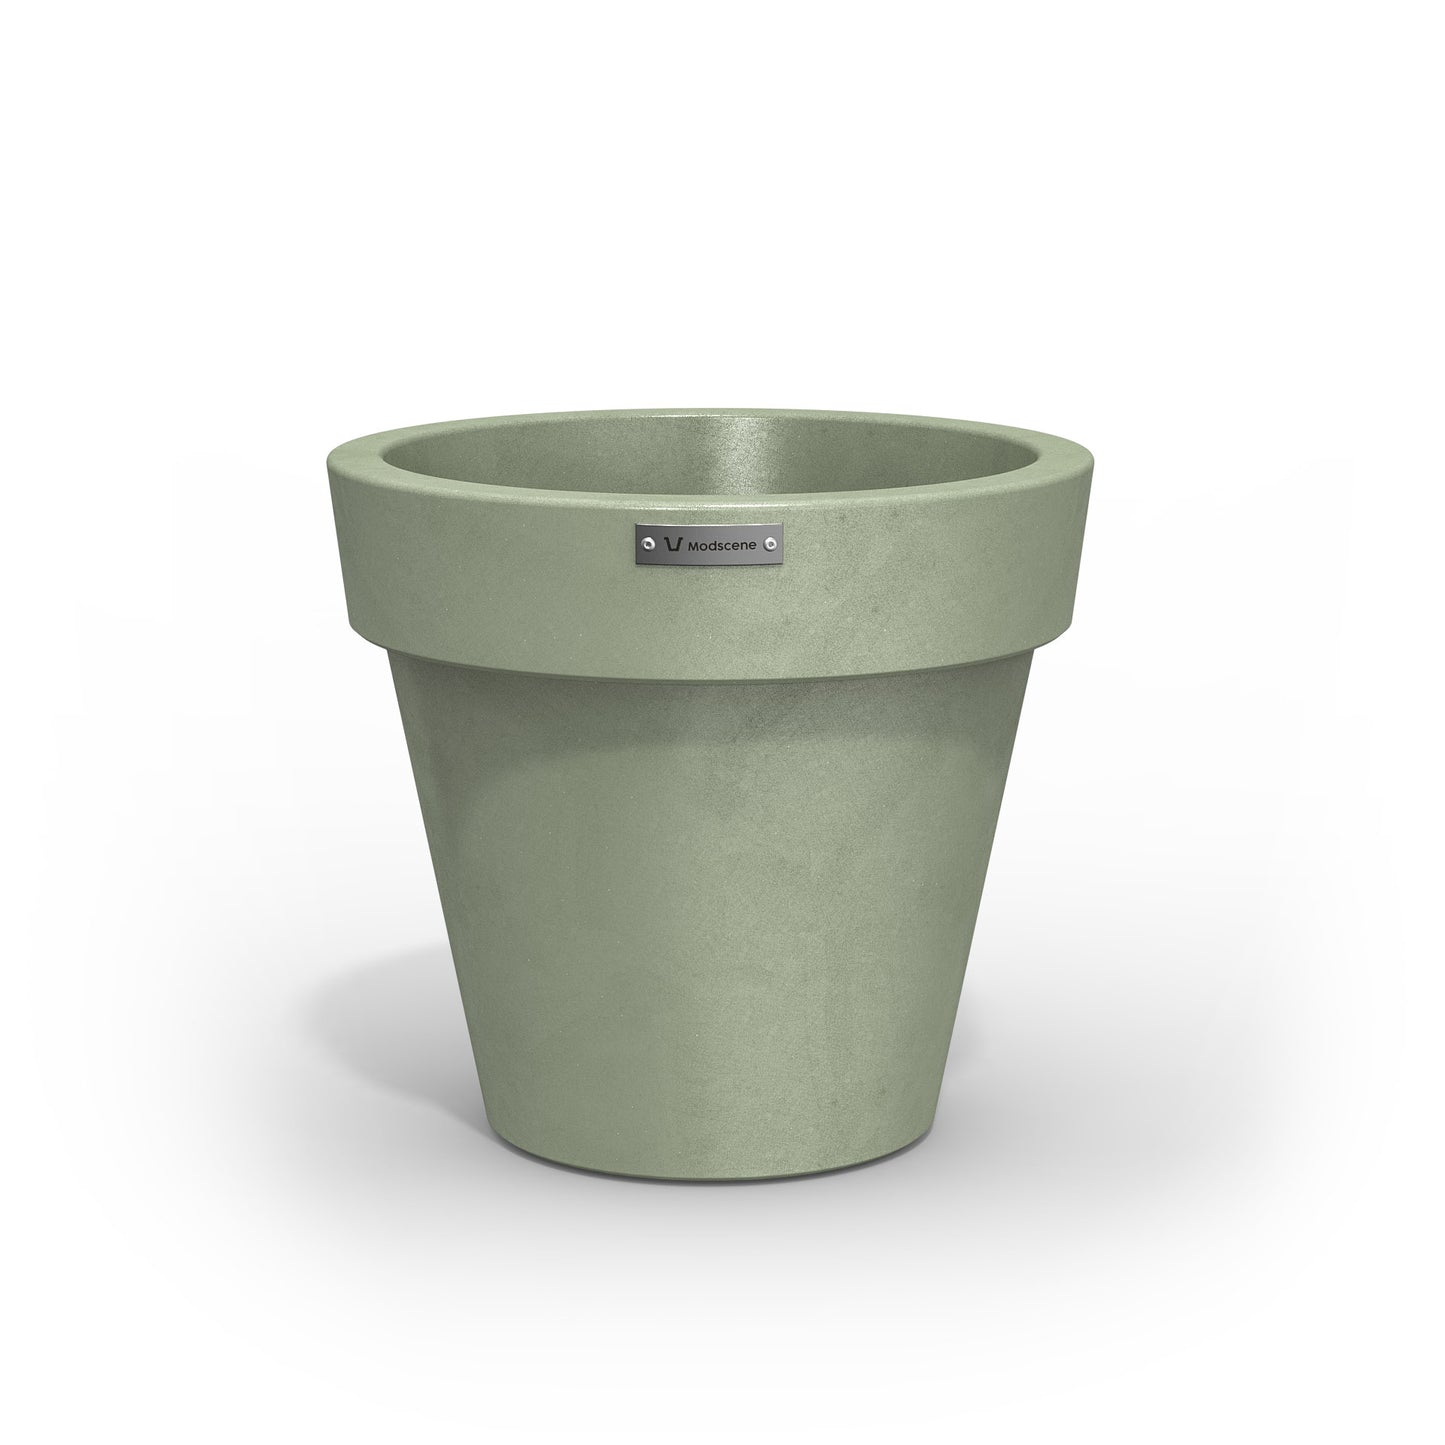 A small Modscene planter pot in a pastel green colour with a concrete look finish.